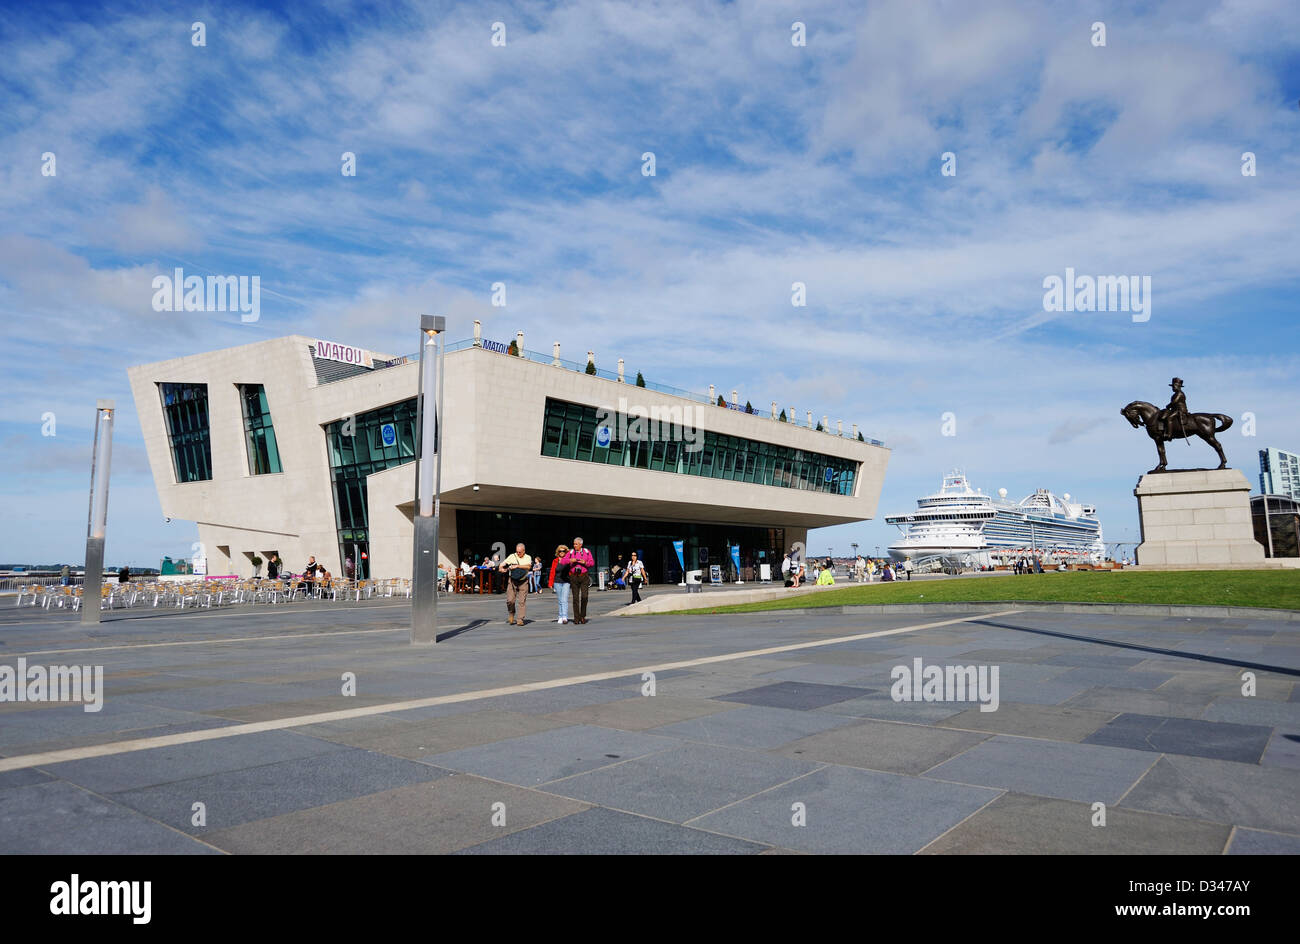 Mersey Ferries Terminal situated on the banks of the River Mersey at Pier Head in Liverpool which hosts the Beatles Museum. Stock Photo